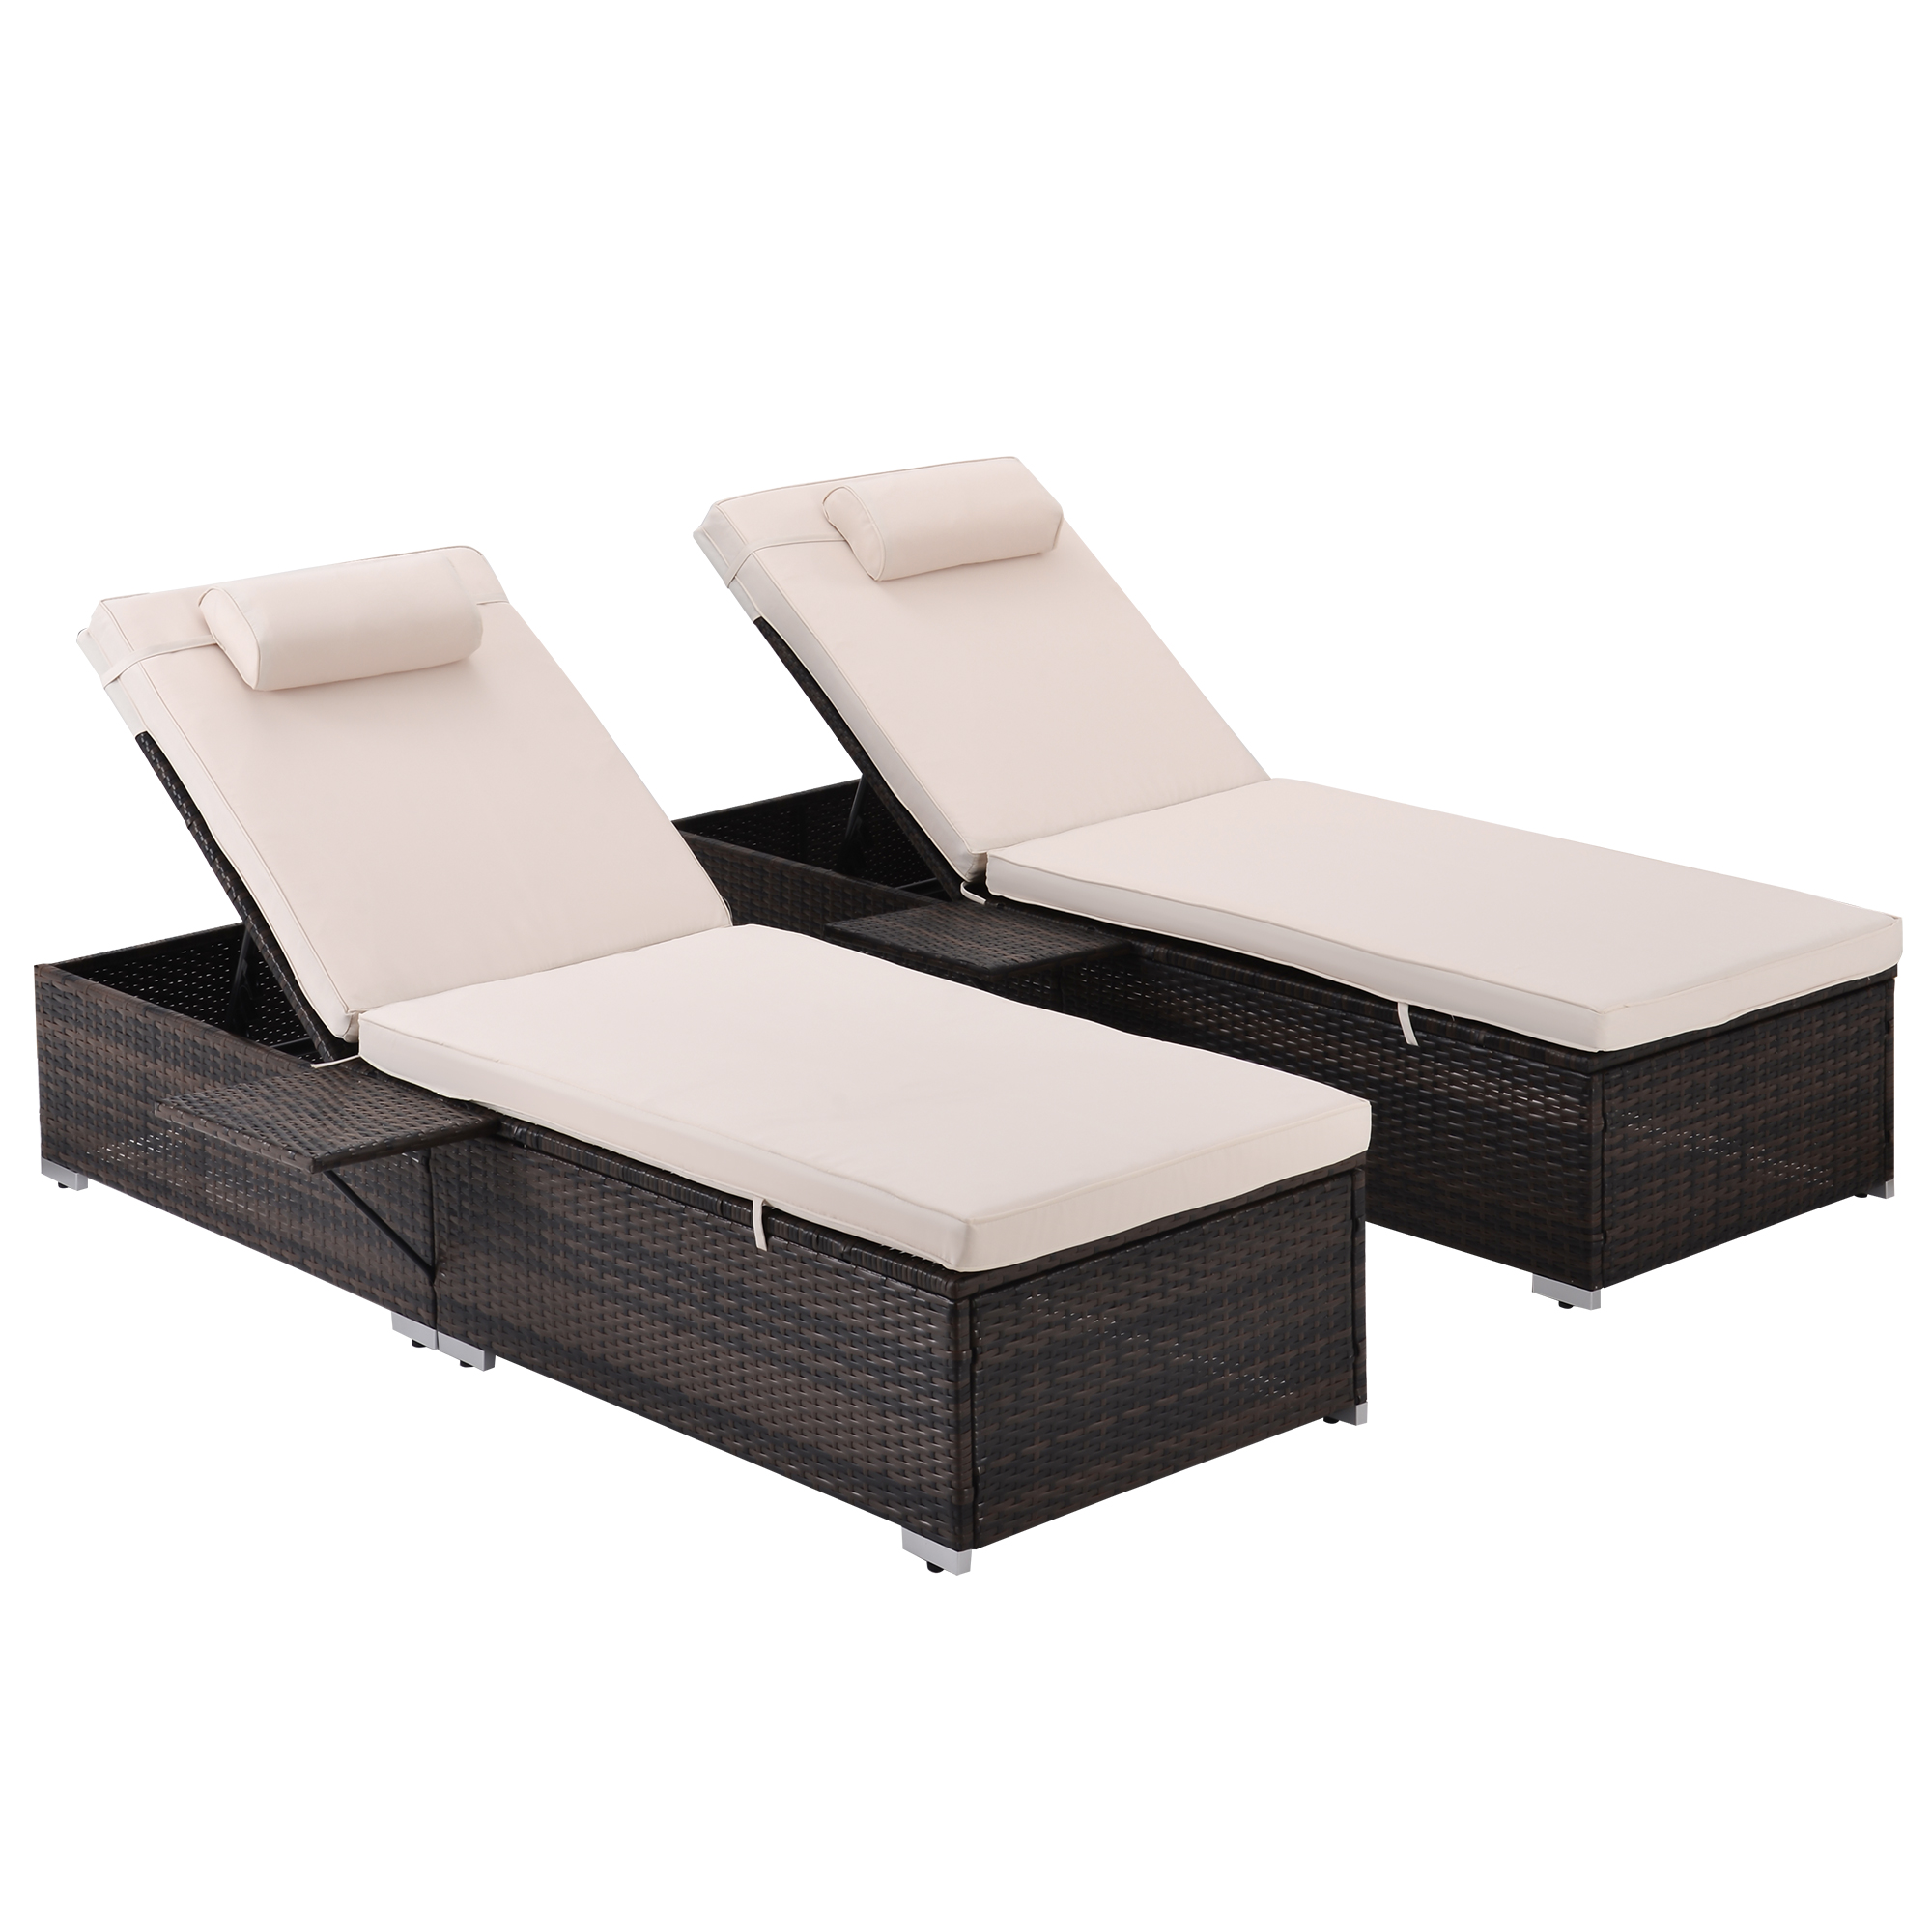 2 Piece Patio Chaise Lounge Furniture Set with Side Table, 5-Position Adjustable Cushioned Rattan Chaise Lounge with Head Pillow, PE Rattan Backrest Lounge Chairs Set for Pool Balcony Deck Yard, B65 - image 3 of 11